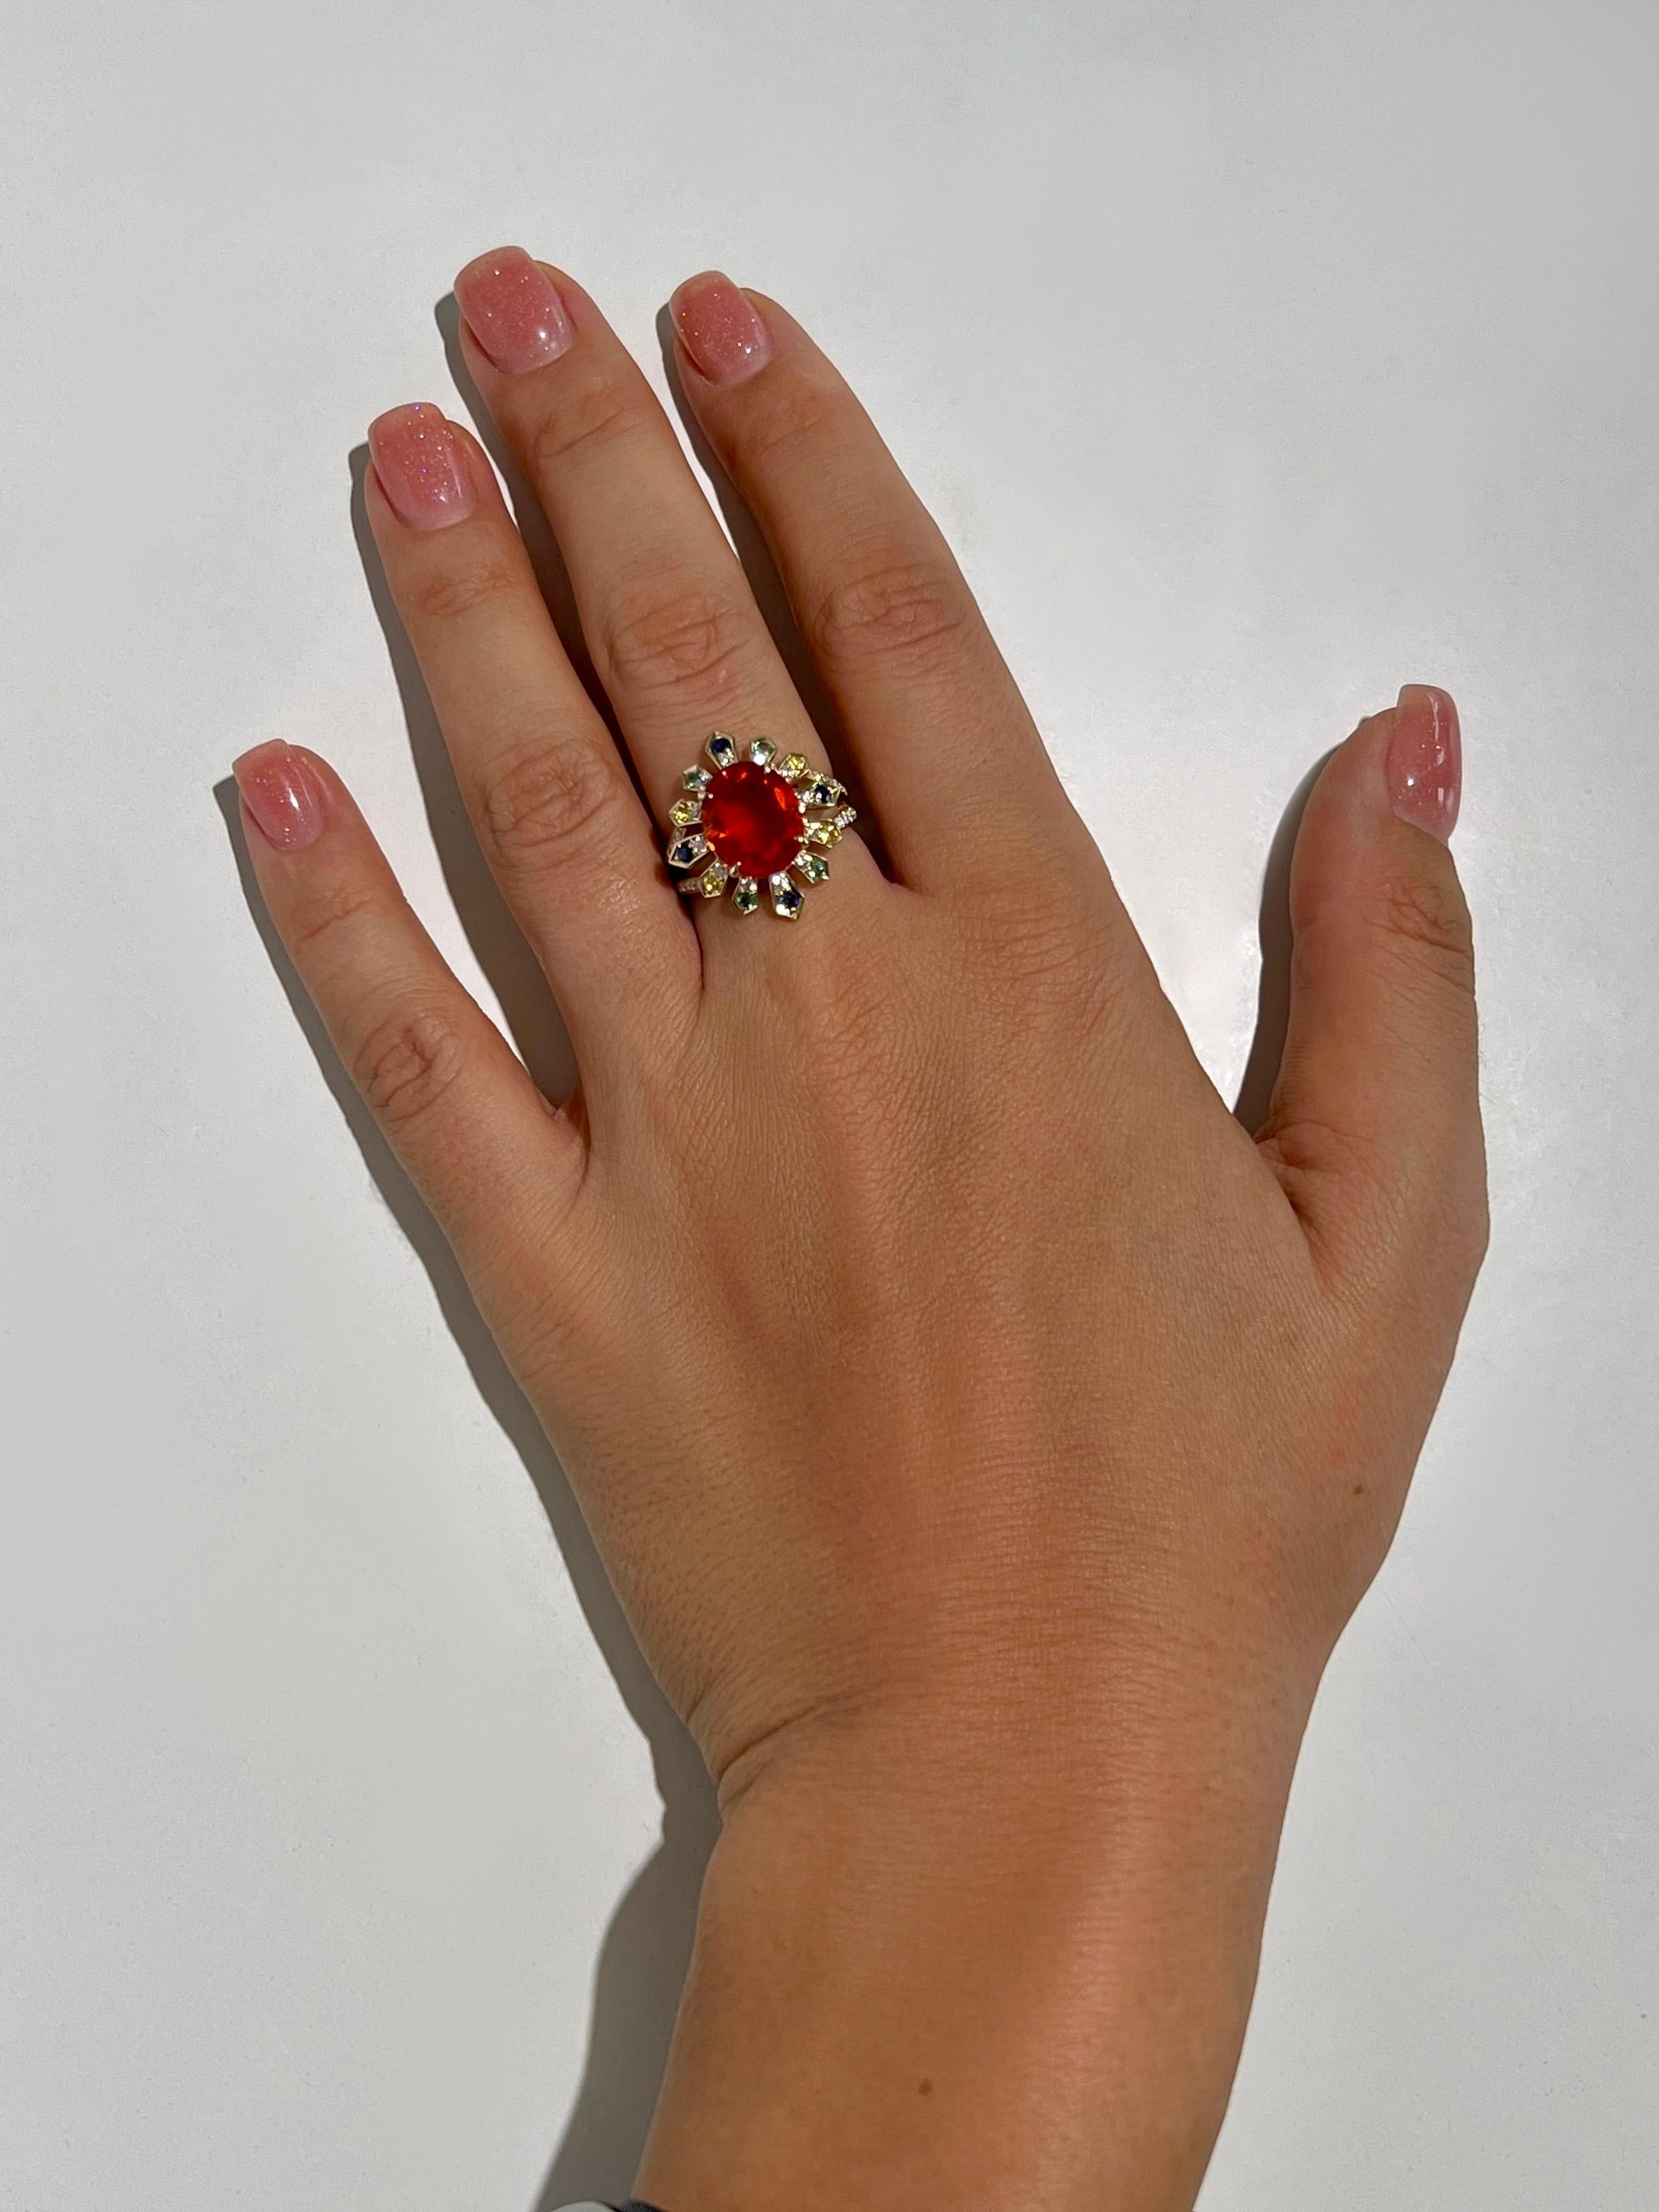 Modern 3 Carat Mexican Fire Opal Ring with Sapphires, Emeralds and Diamonds in 18k Gold